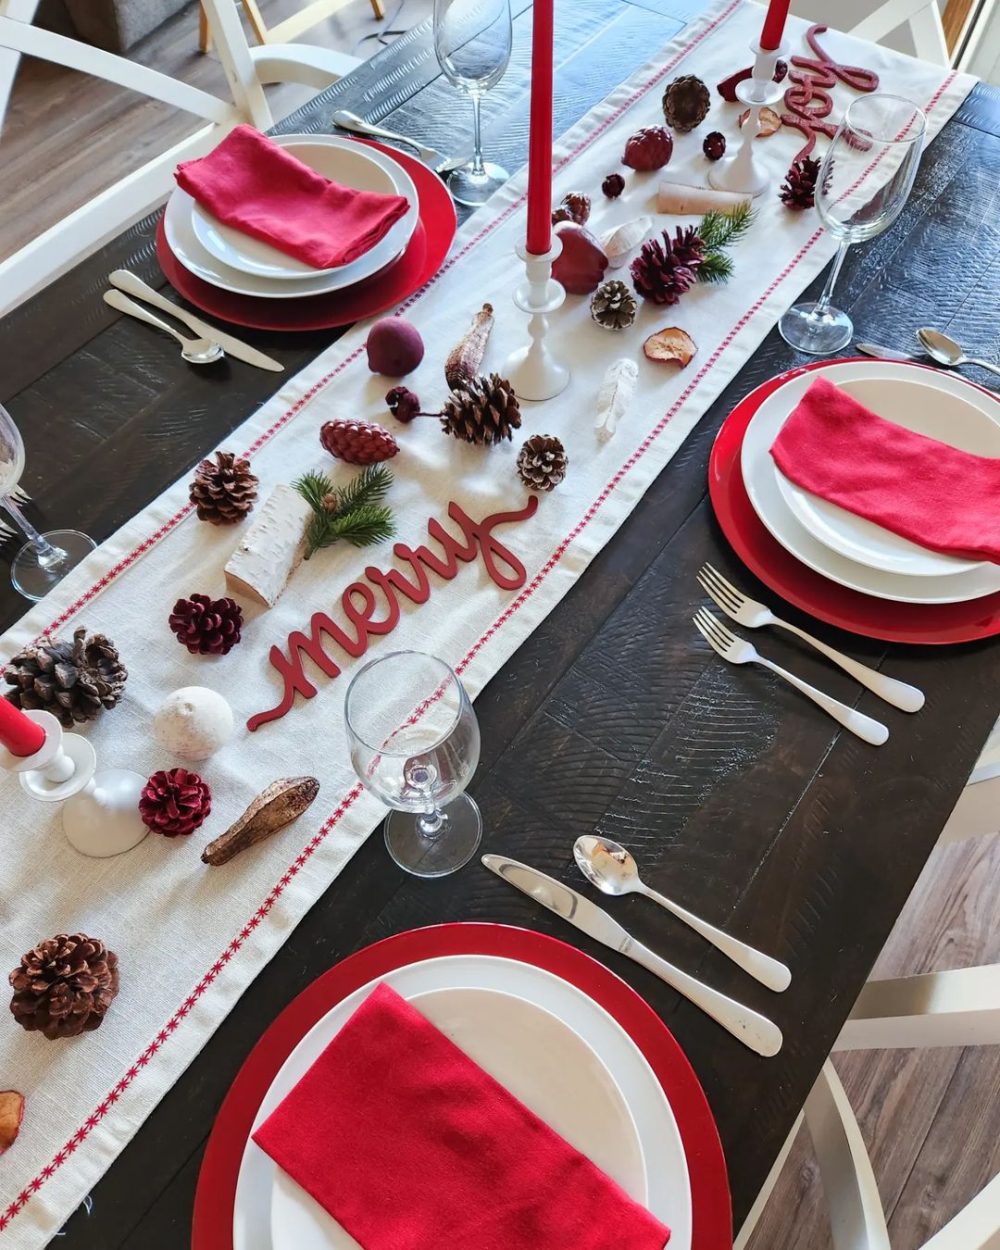 Here Are The Most Beautiful Christmas Table Decorations On Pinterest & Instagram